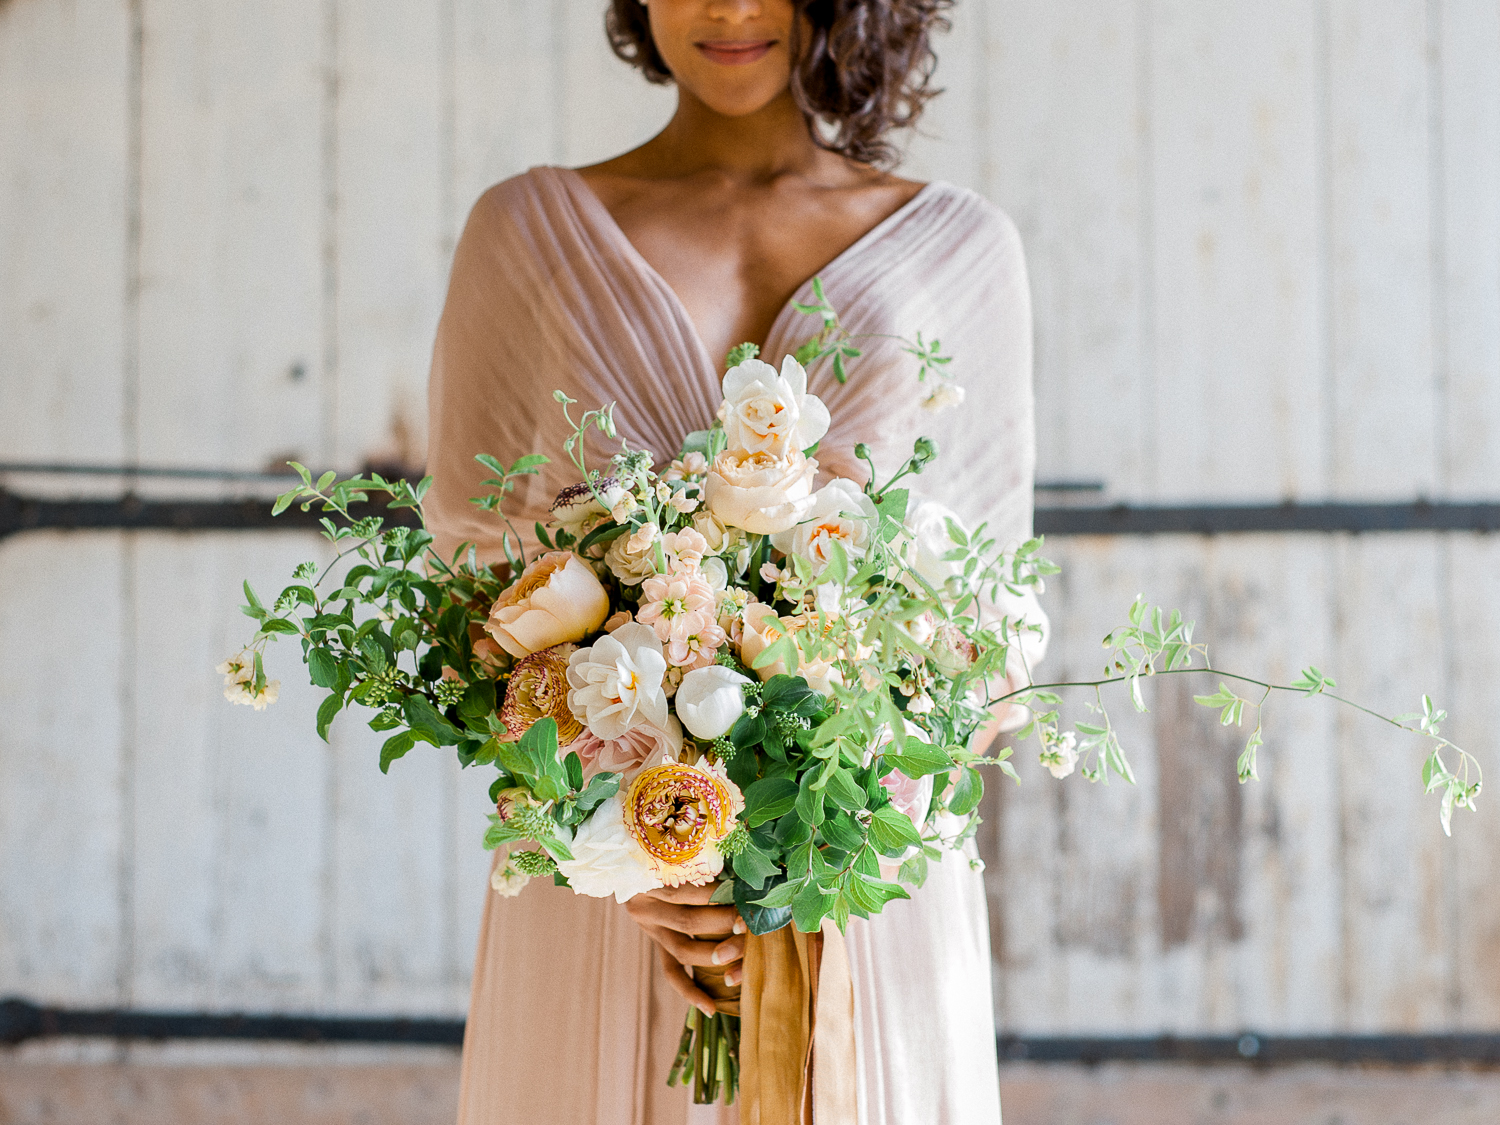 Beautiful wedding bouquet with silk ribbons by Laetitia Fleurs d'atelier